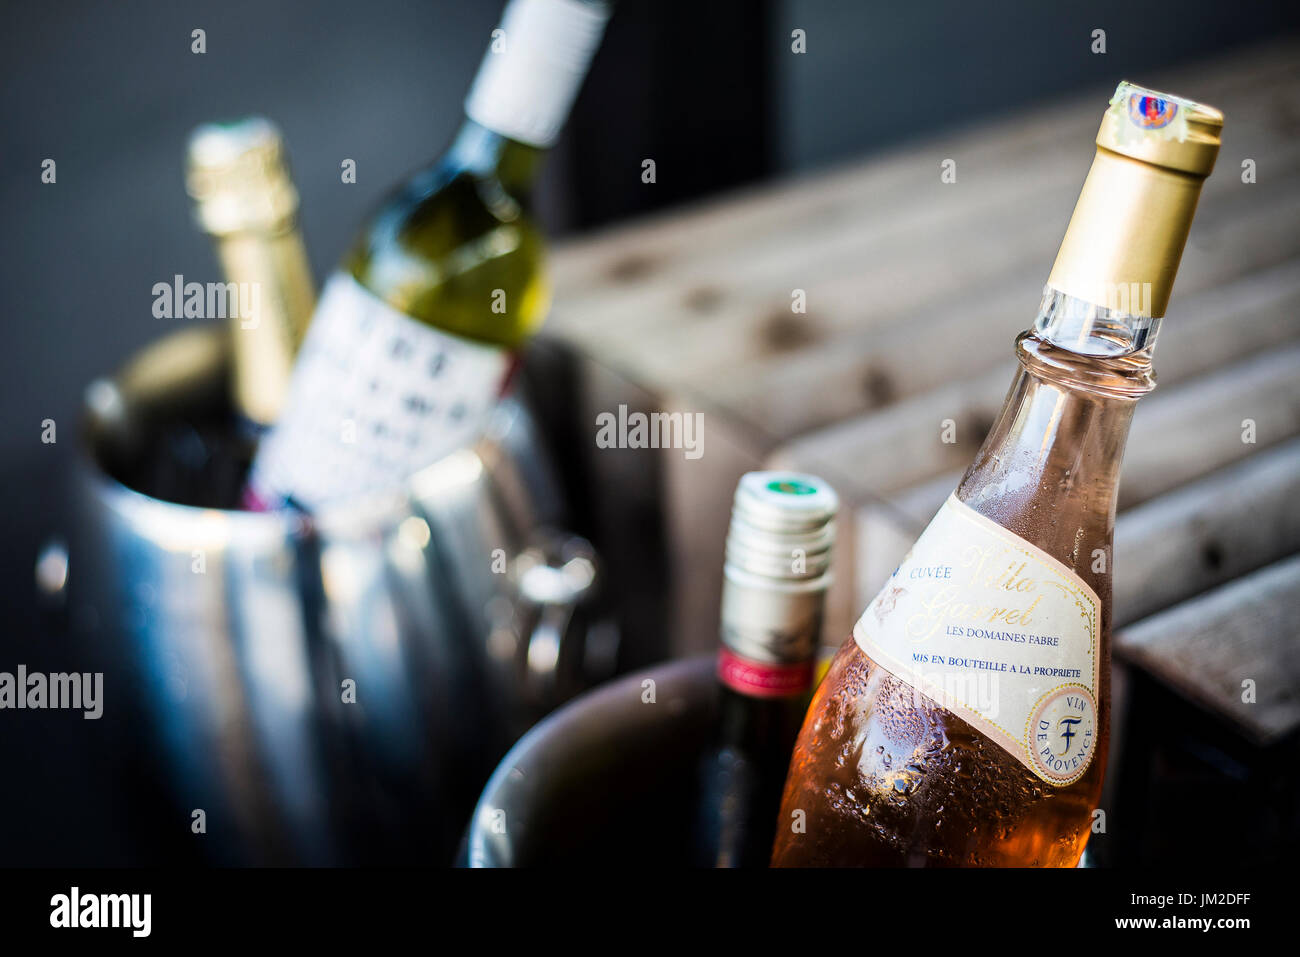 mixed bottles of gourmet wine in ice chiller bucket at bar Stock Photo